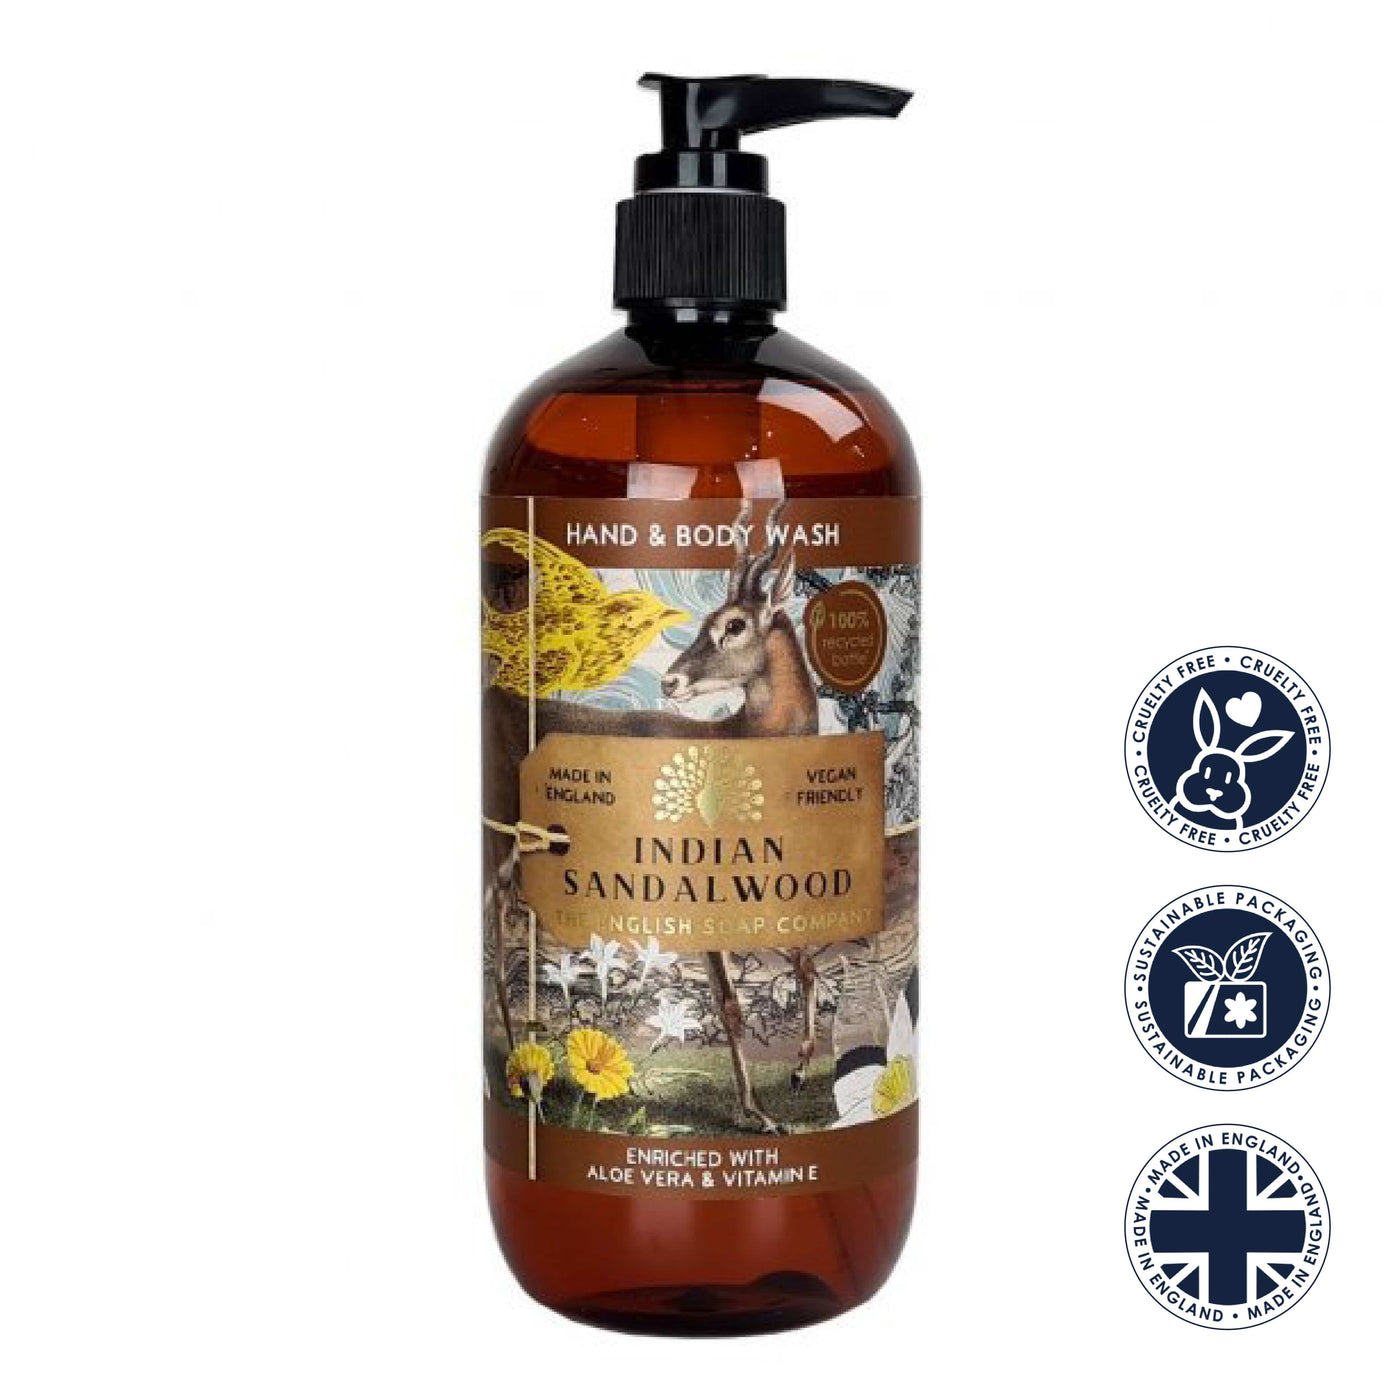 Indian Sandalwood Hand & Body Wash - Anniversary Collection from our Liquid Hand & Body Soap collection by The English Soap Company